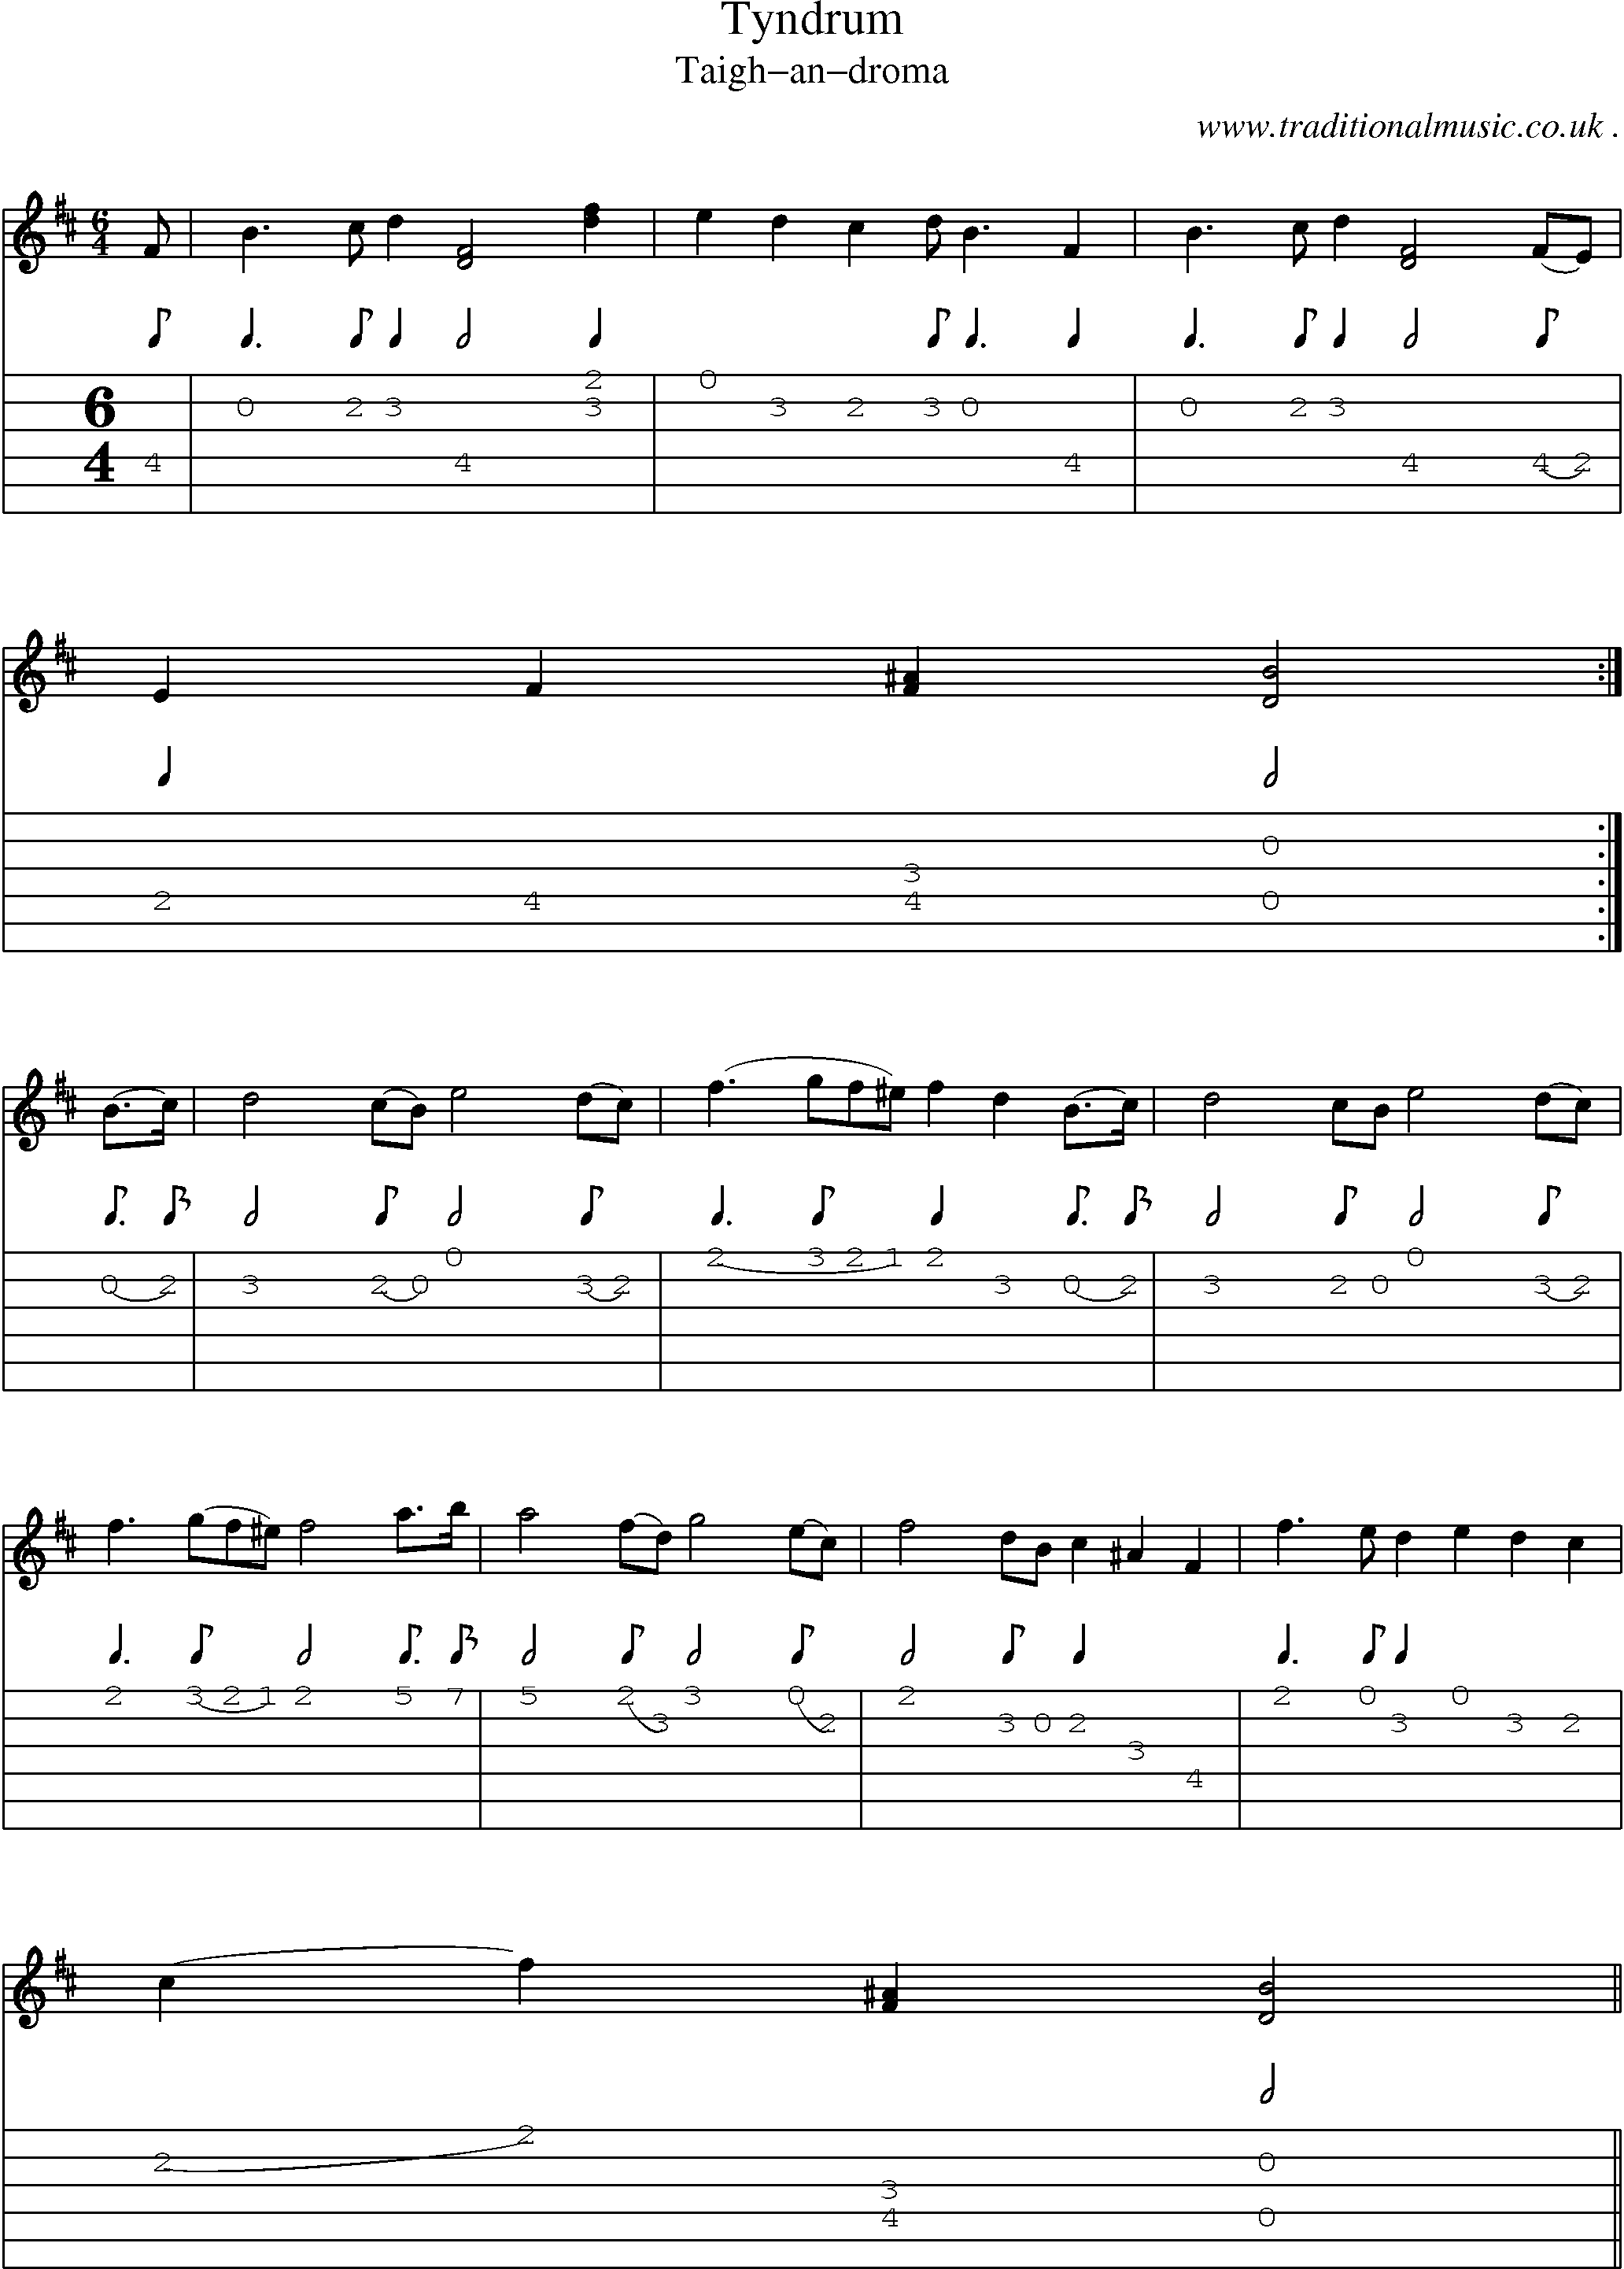 Sheet-music  score, Chords and Guitar Tabs for Tyndrum